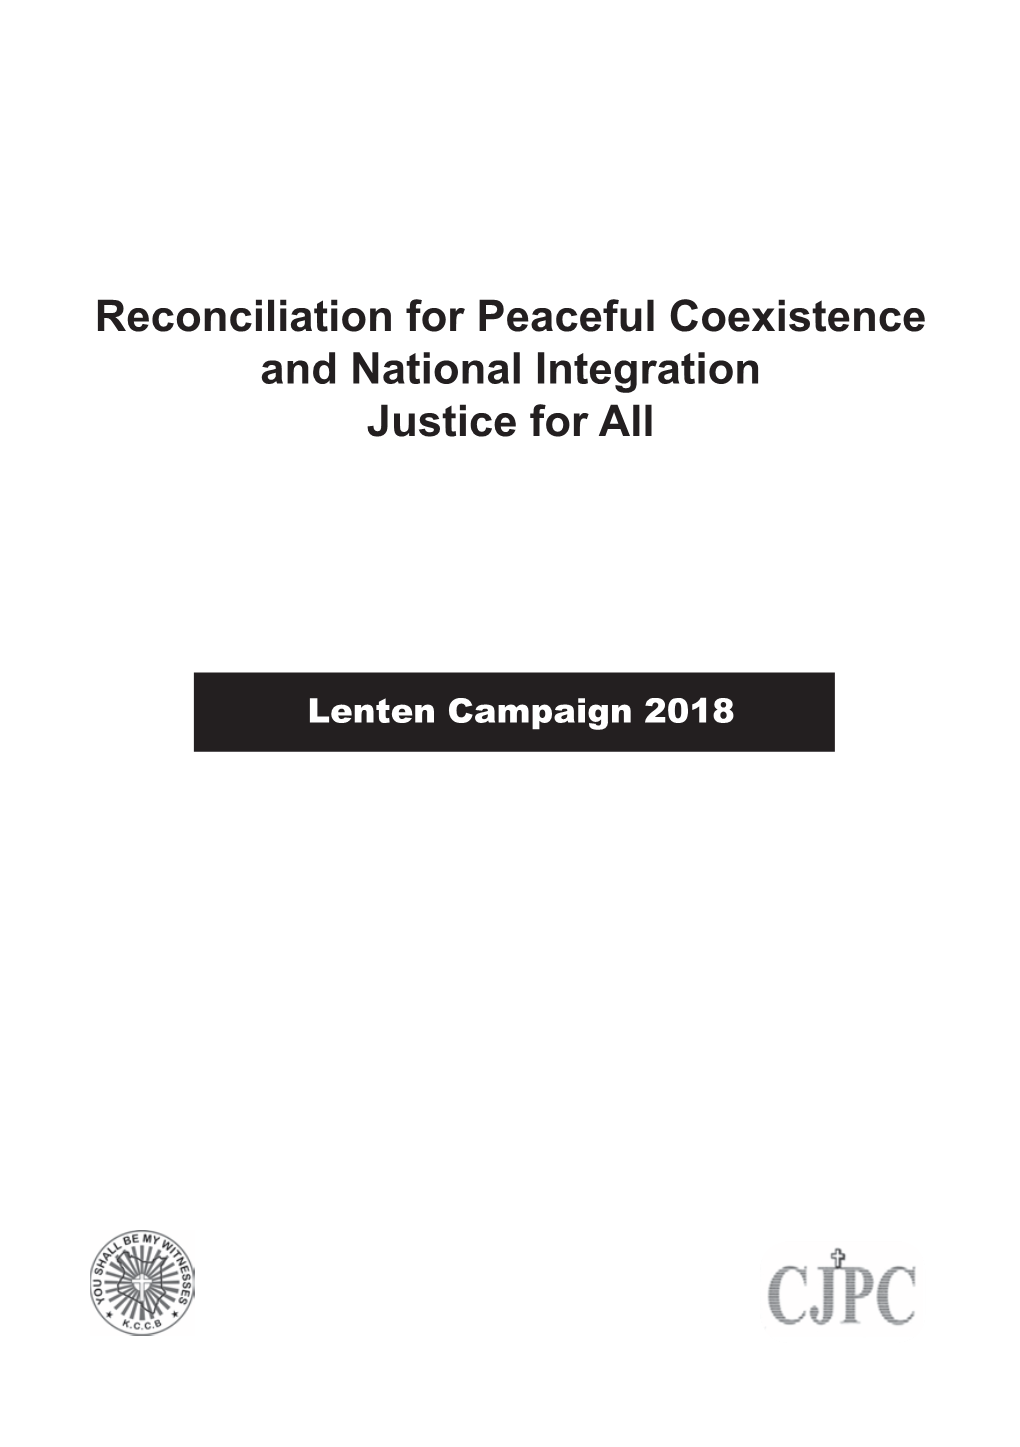 Reconciliation for Peaceful Coexistence and National Integration Justice for All